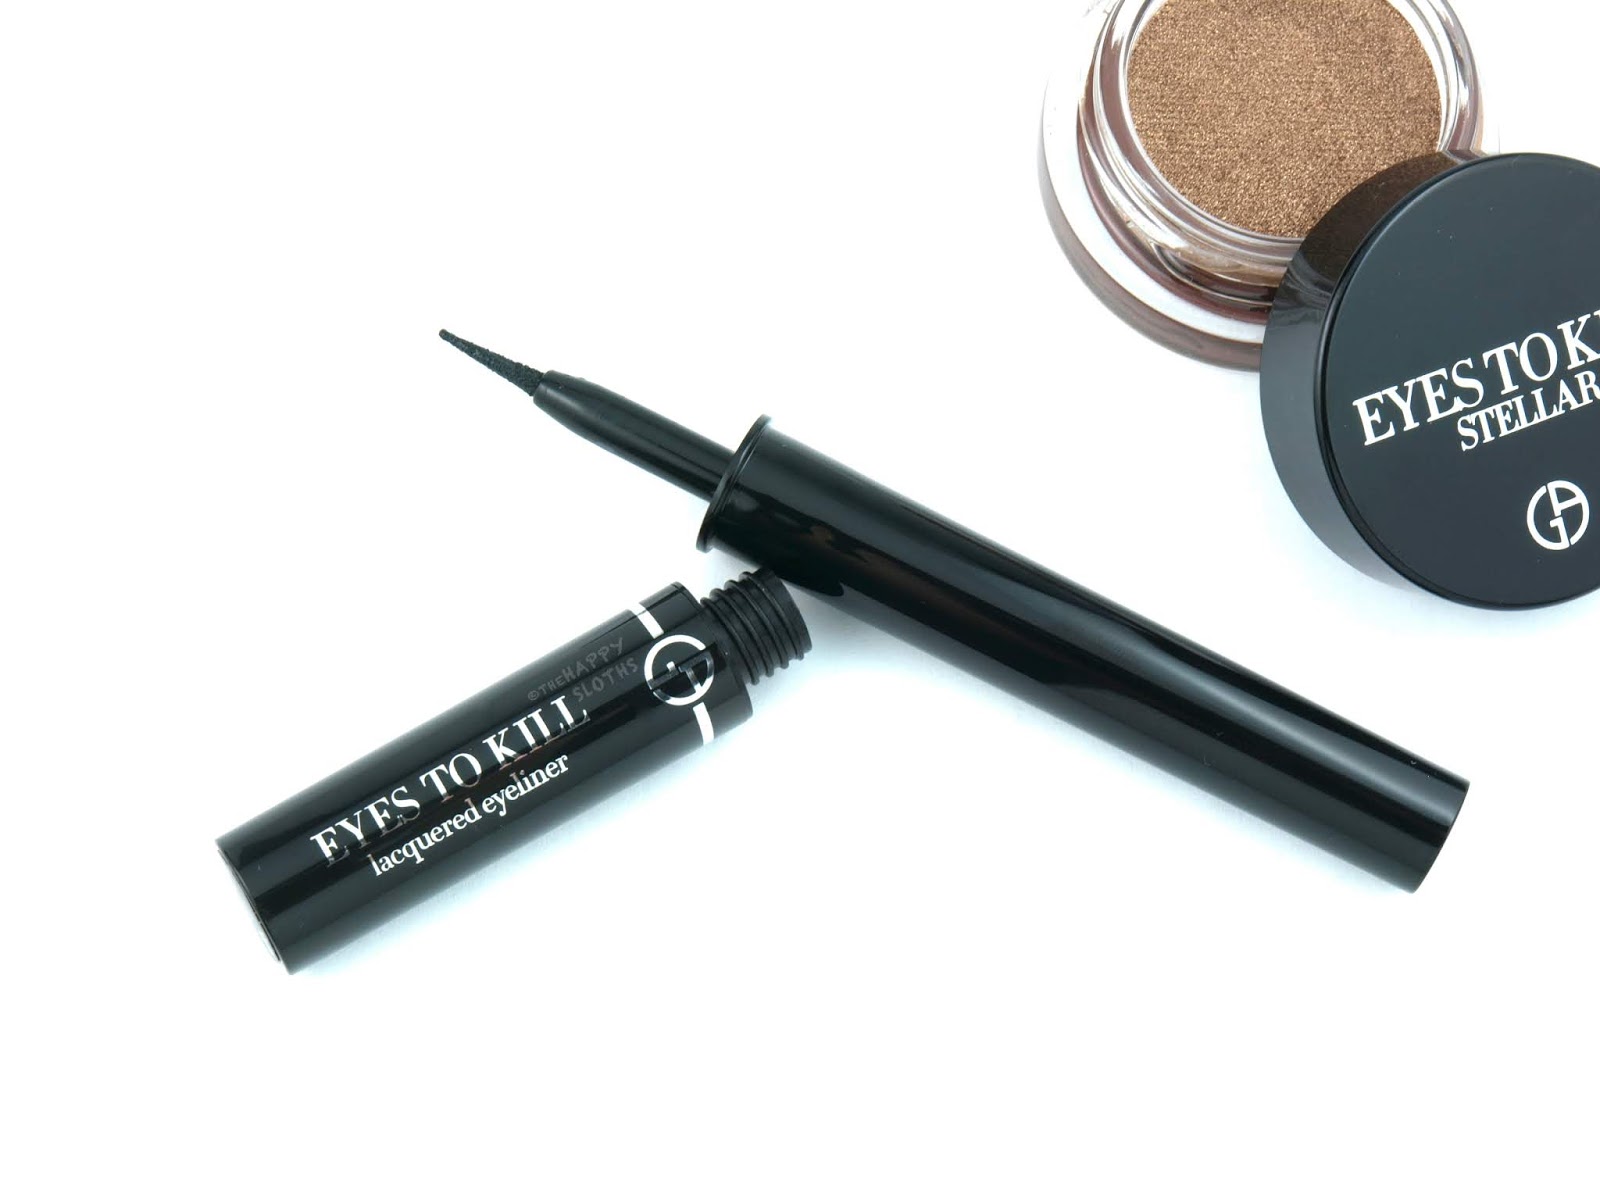 Giorgio Armani Beauty | Eyes to Kill Lacquered Eyeliner in "1 Onyx": Review and Swatches